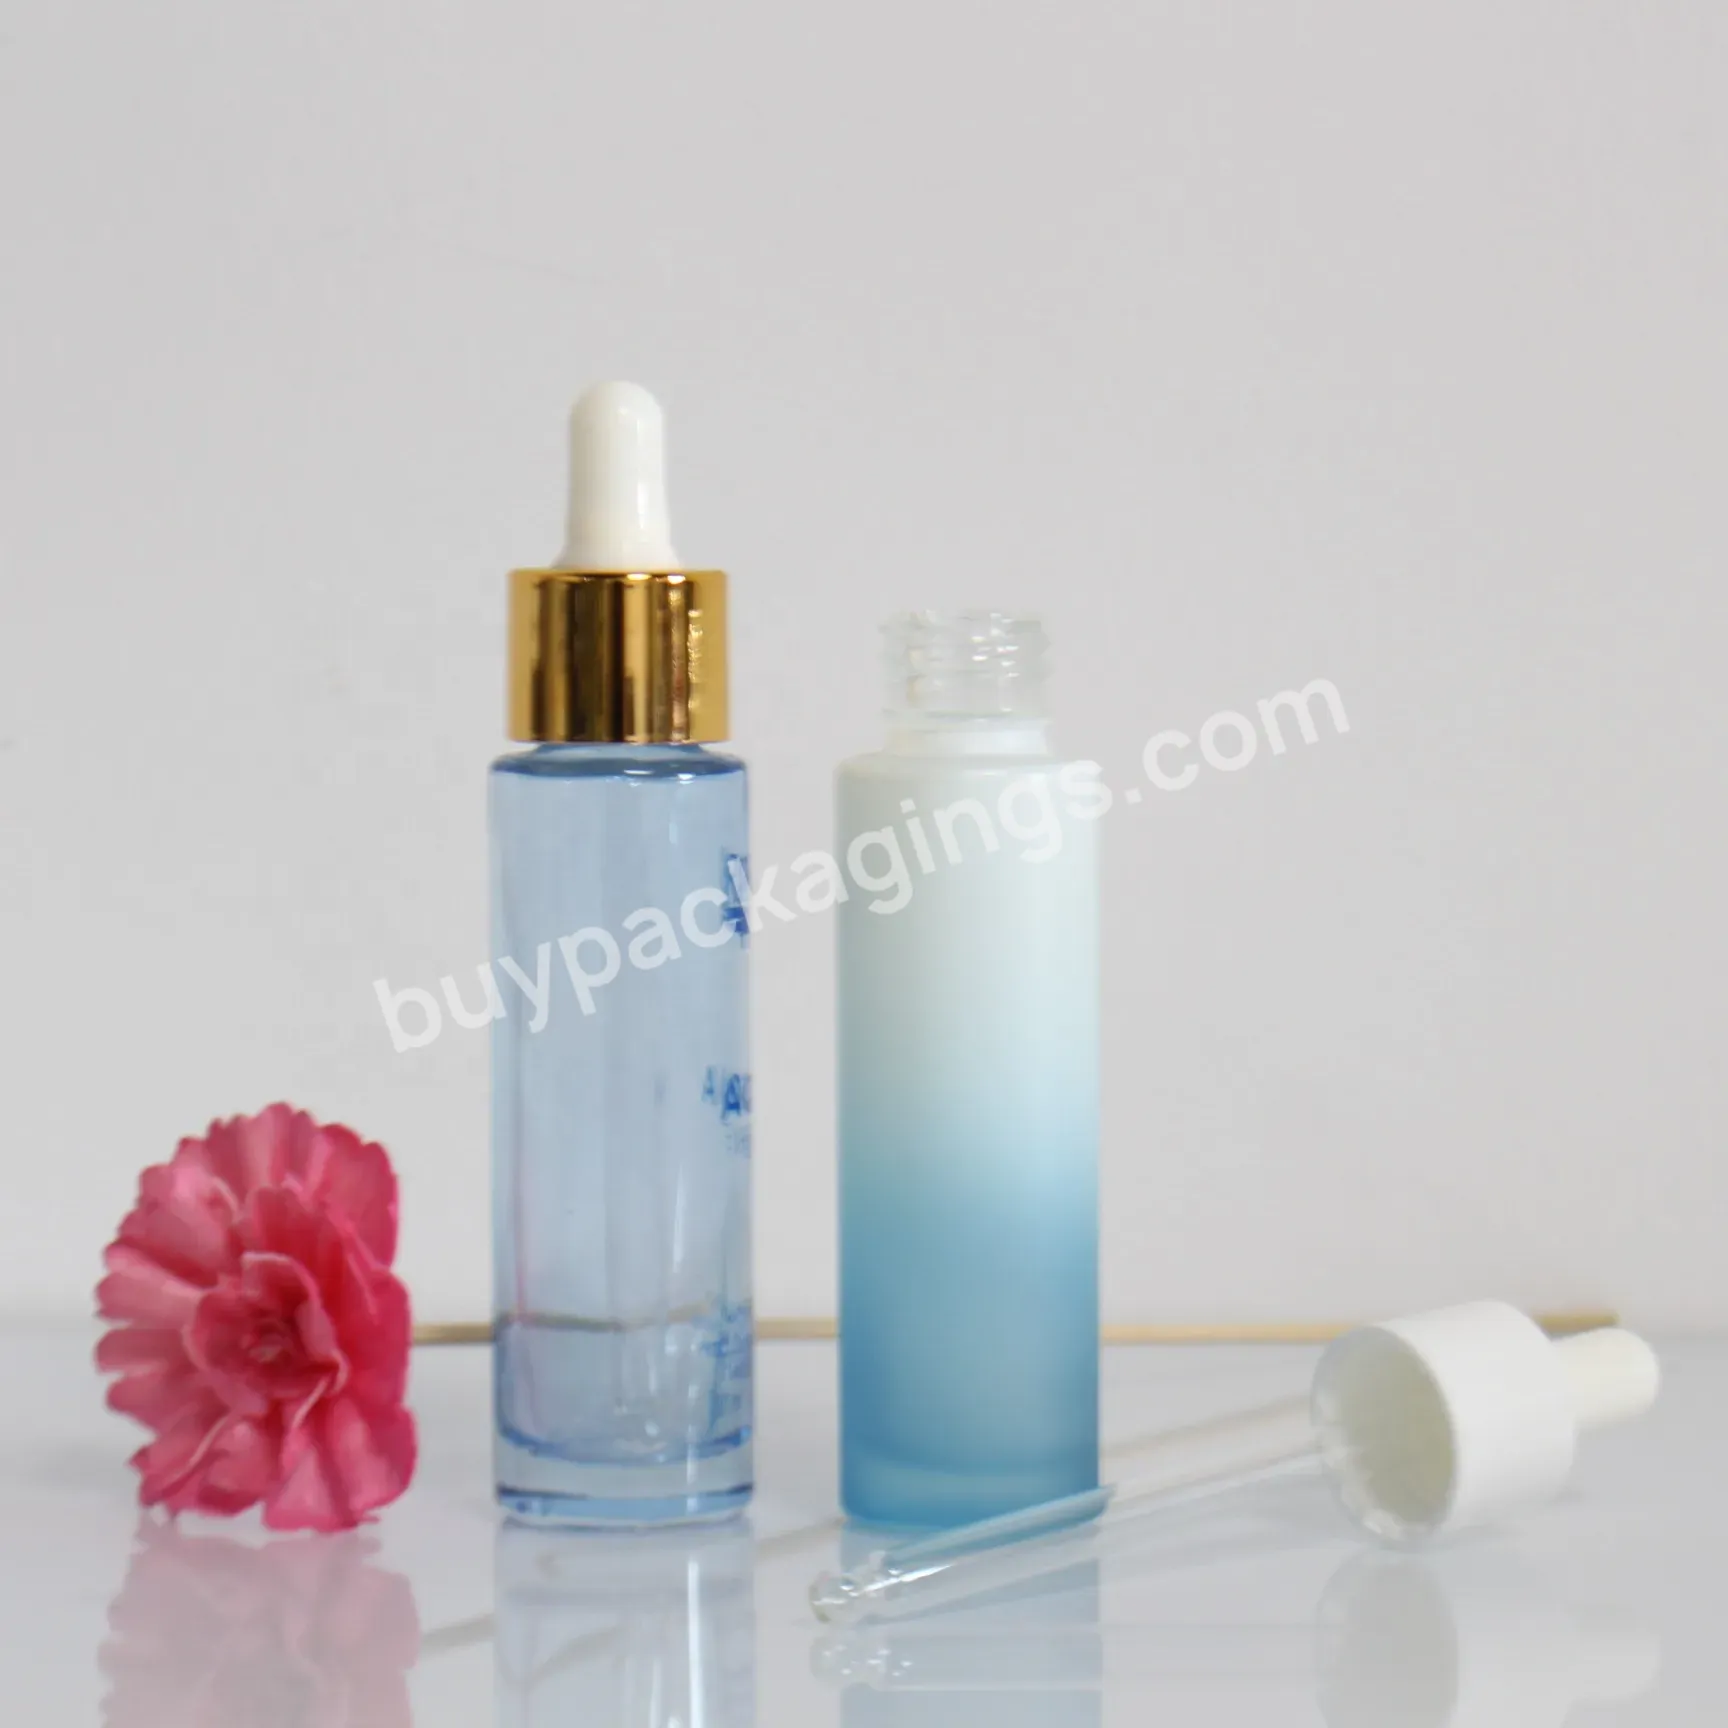 Hot Sale High Quality Glass Lotion Bottle With Pump Or Screw Cap For Skincare Cosmetic Packaging - Buy White Opal Square Glass Lotion Bottle,Bottle With Pump Or Screw Cap,White Opal Square Glass Lotion Bottle With Pump Or Screw Cap For Skincare Cosme